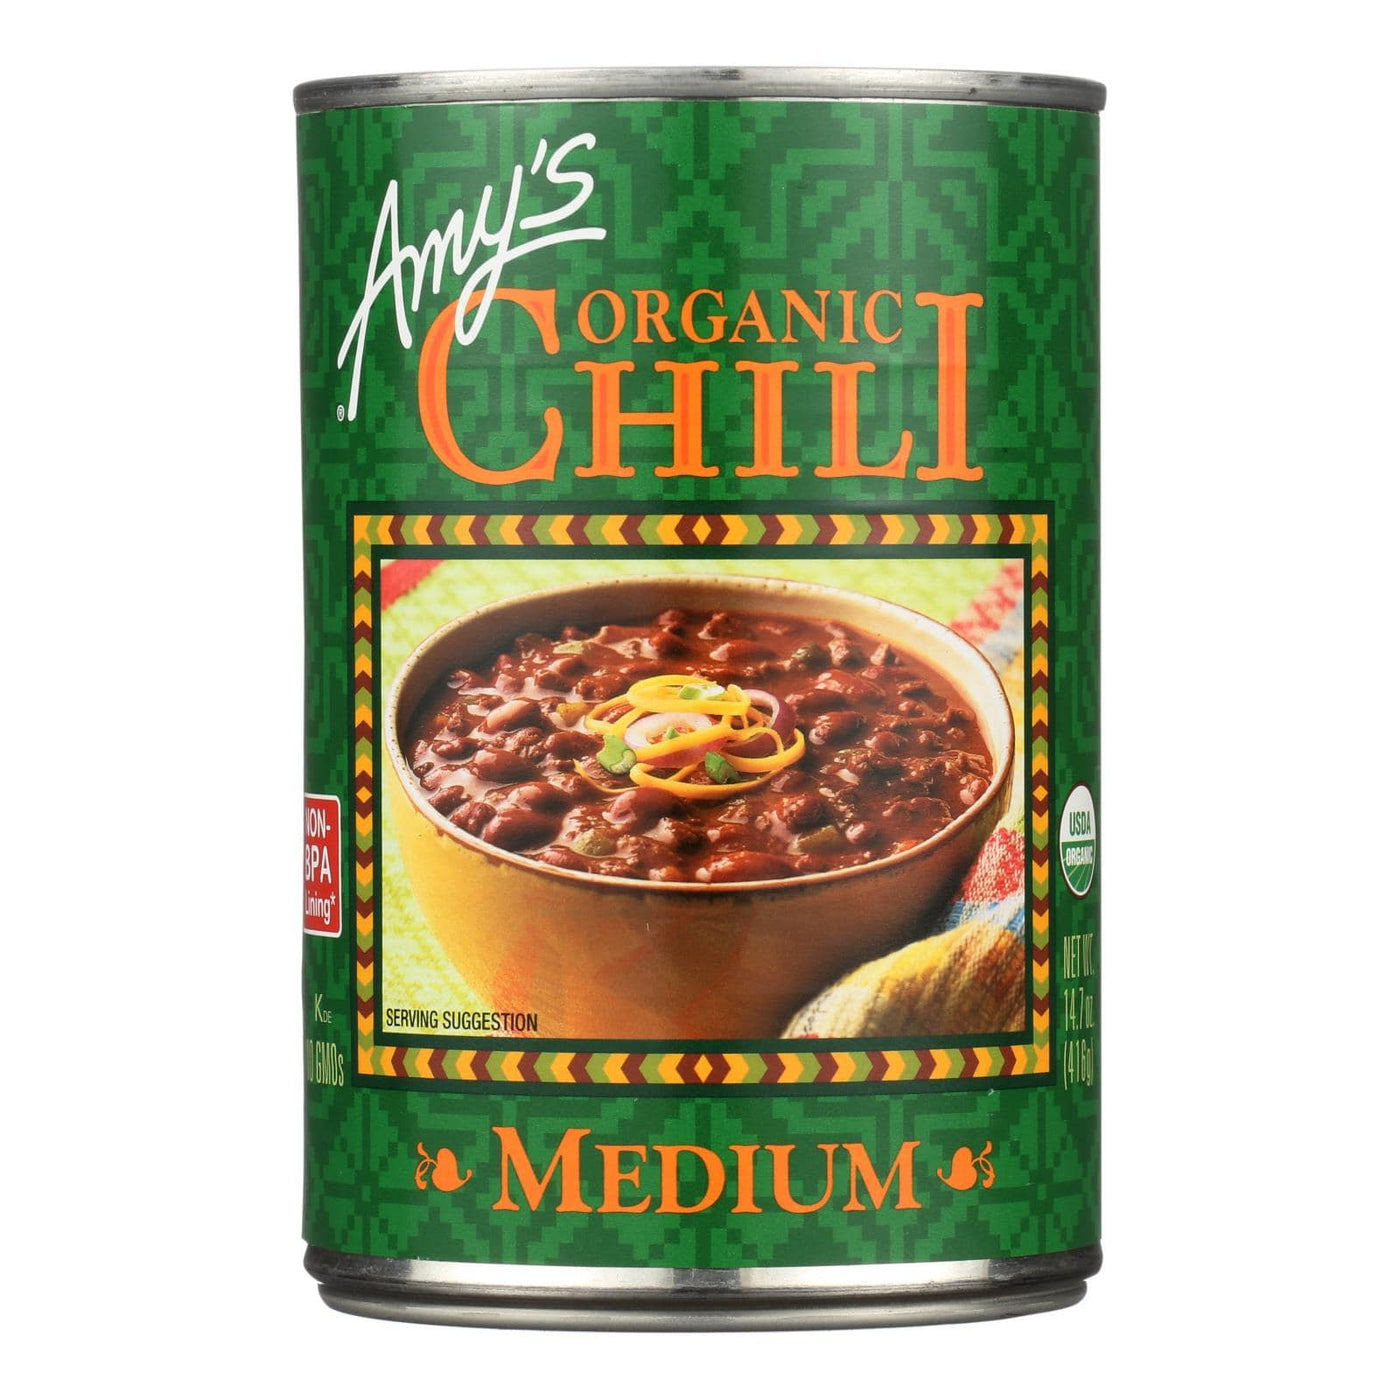 Buy Amy's - Organic Medium Chili - Case Of 12 - 14.7 Oz  at OnlyNaturals.us